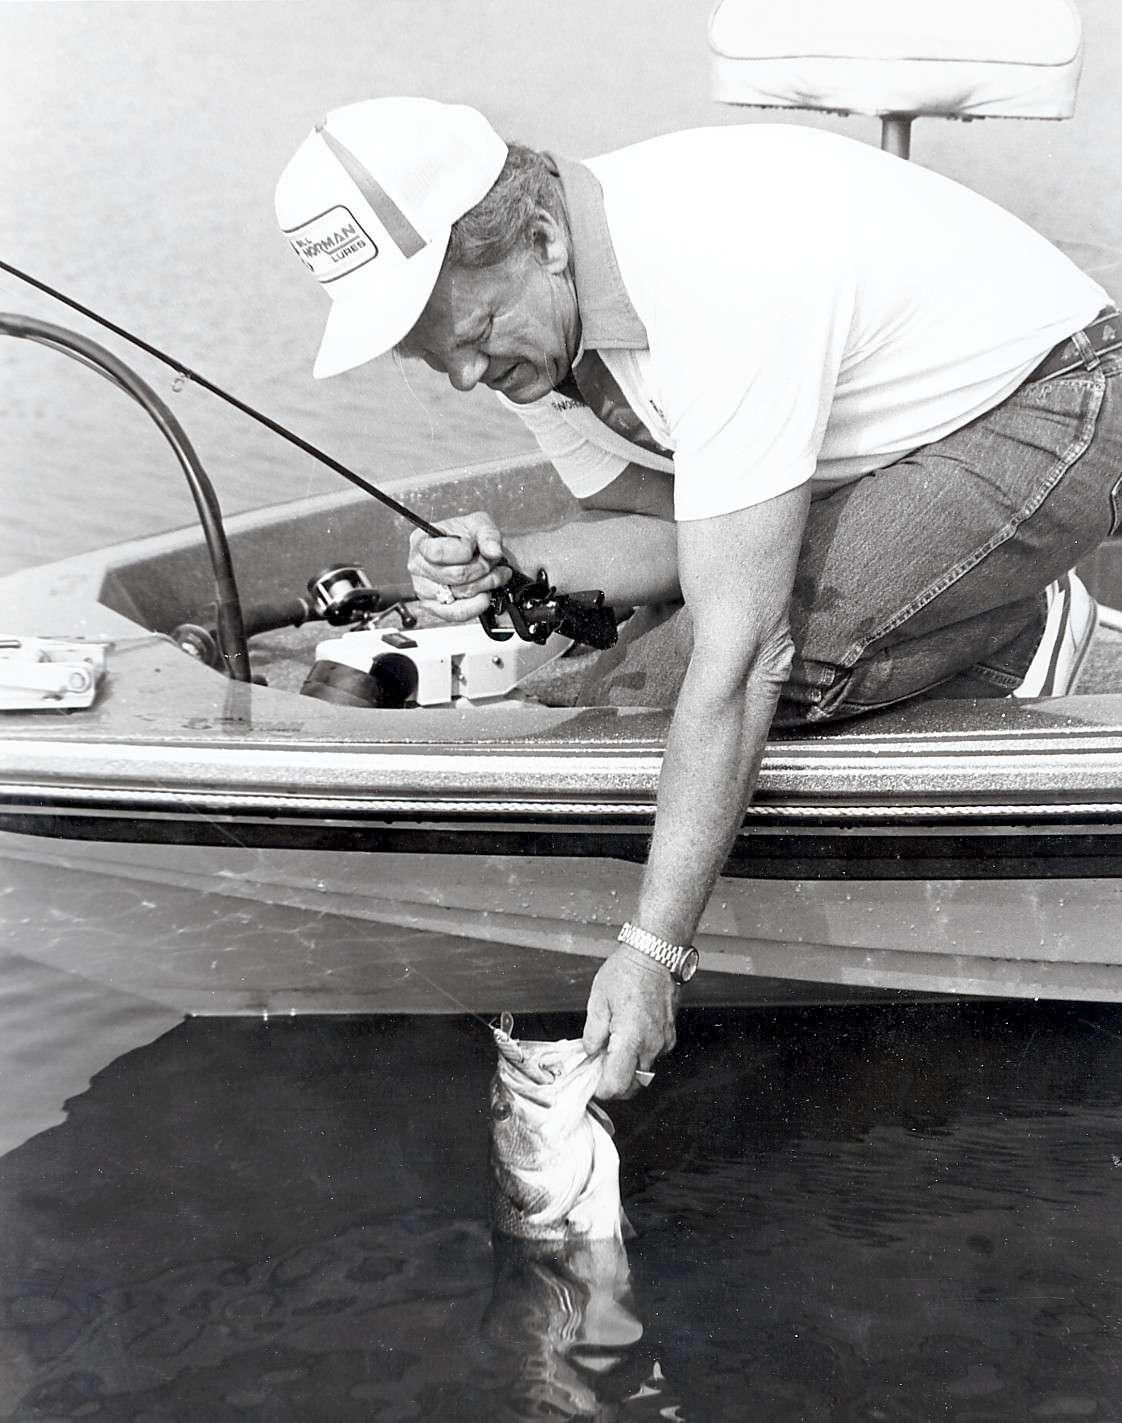 <h4>Bill Norman</h4><BR>
Bill Norman founded Norman Lures in the early 1960s. Some of Normanâs early creations are still being marketed and used to catch fish today. These include the DD22 and Deep Little N, which continue to be standards in deep-diving crankbaits. Being an early pioneer, Norman looked at major bass tournaments as a route to get his lures before the general public.  
